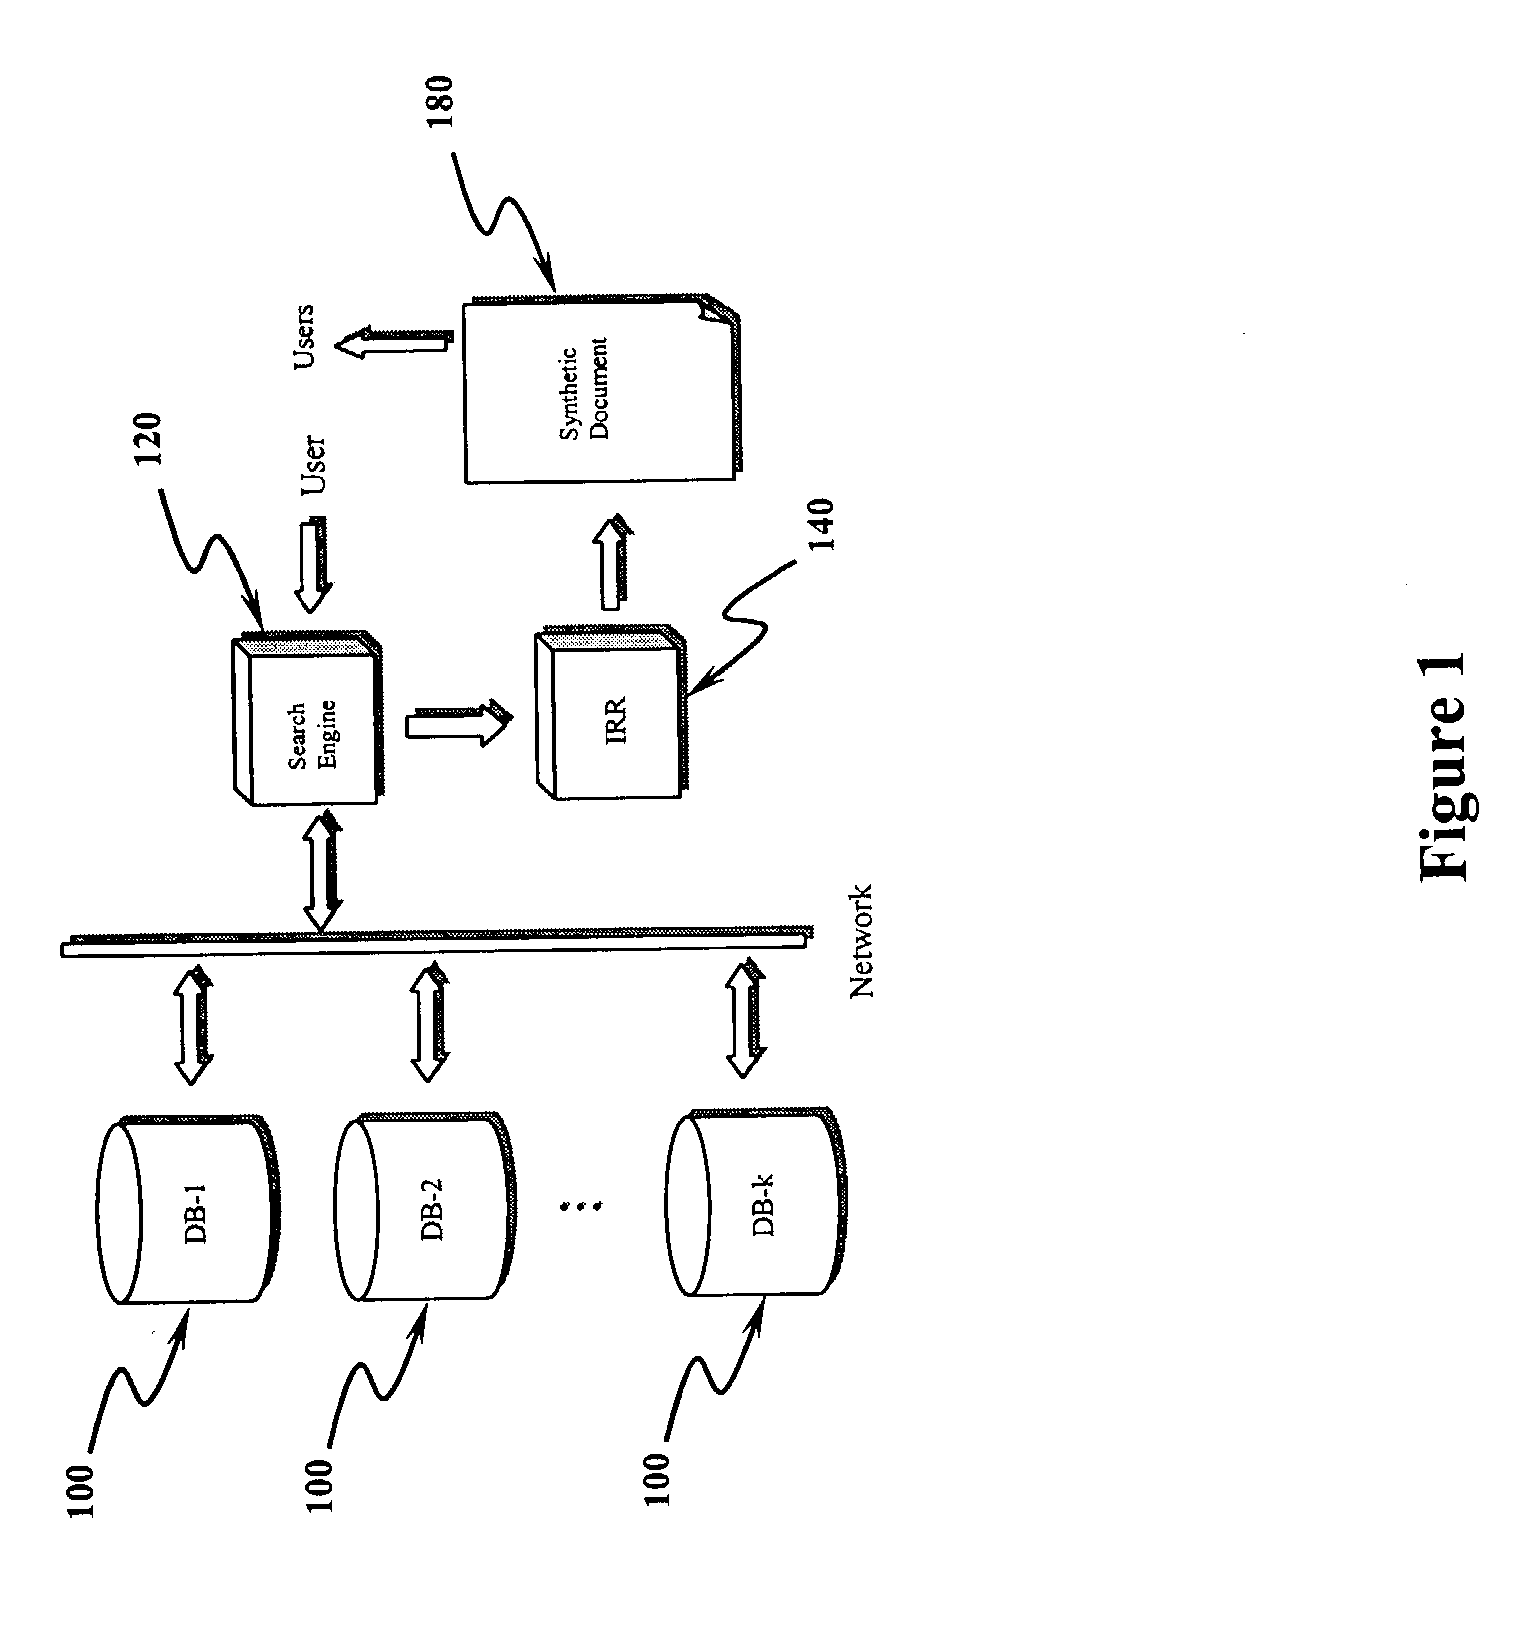 Method and apparatus for removing redundant information from digital documents